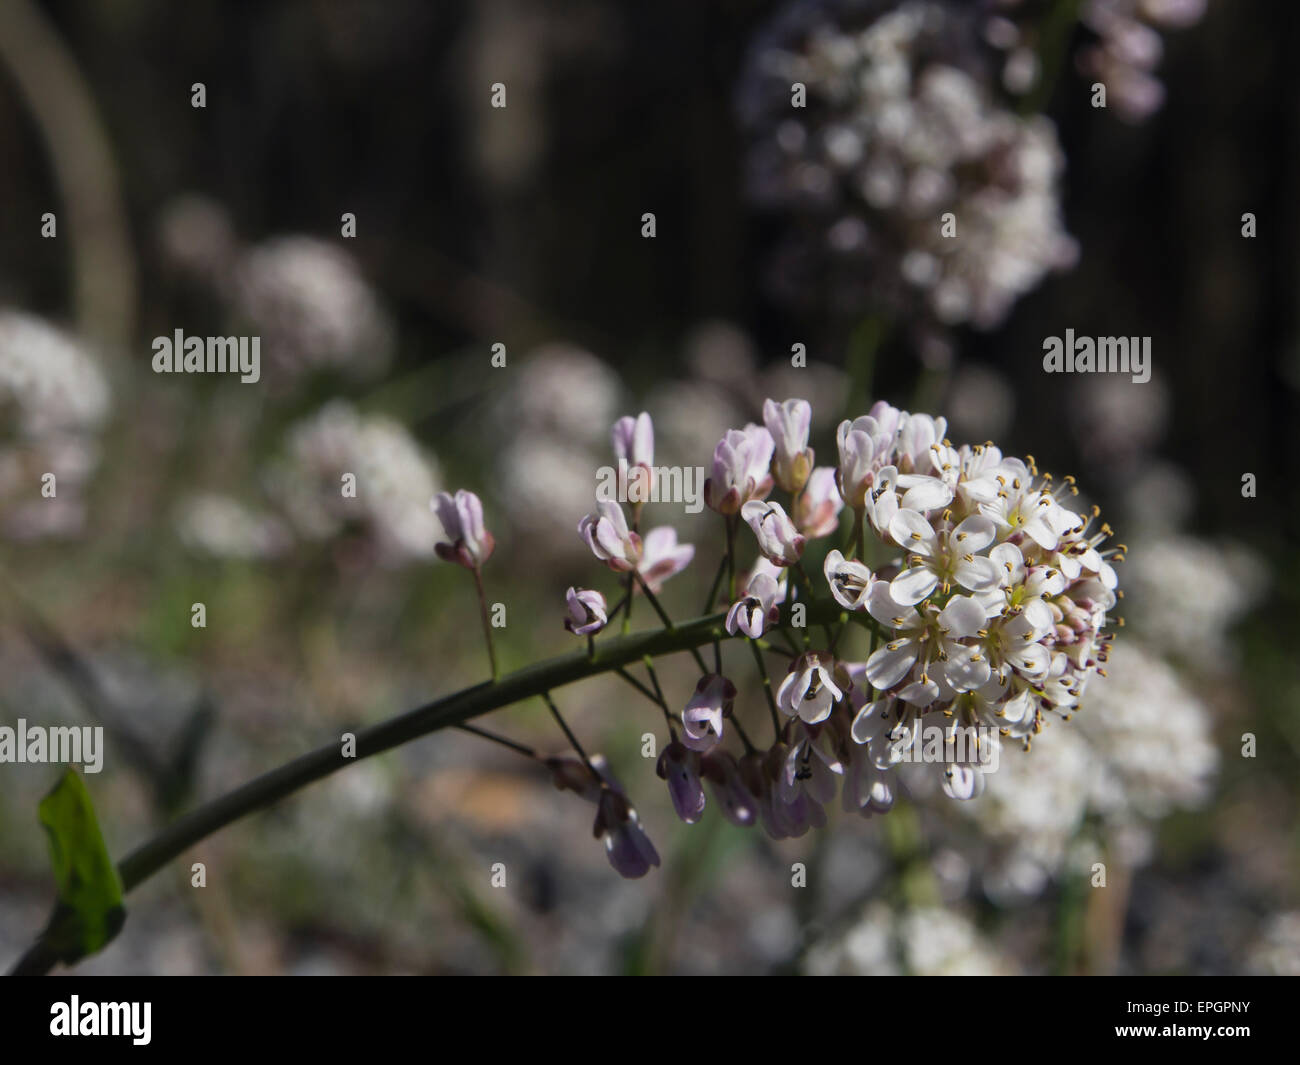 Thlaspi caerulescens,  Alpine Penny-cress or Alpine Pennygrass, common in Norway in early spring Stock Photo